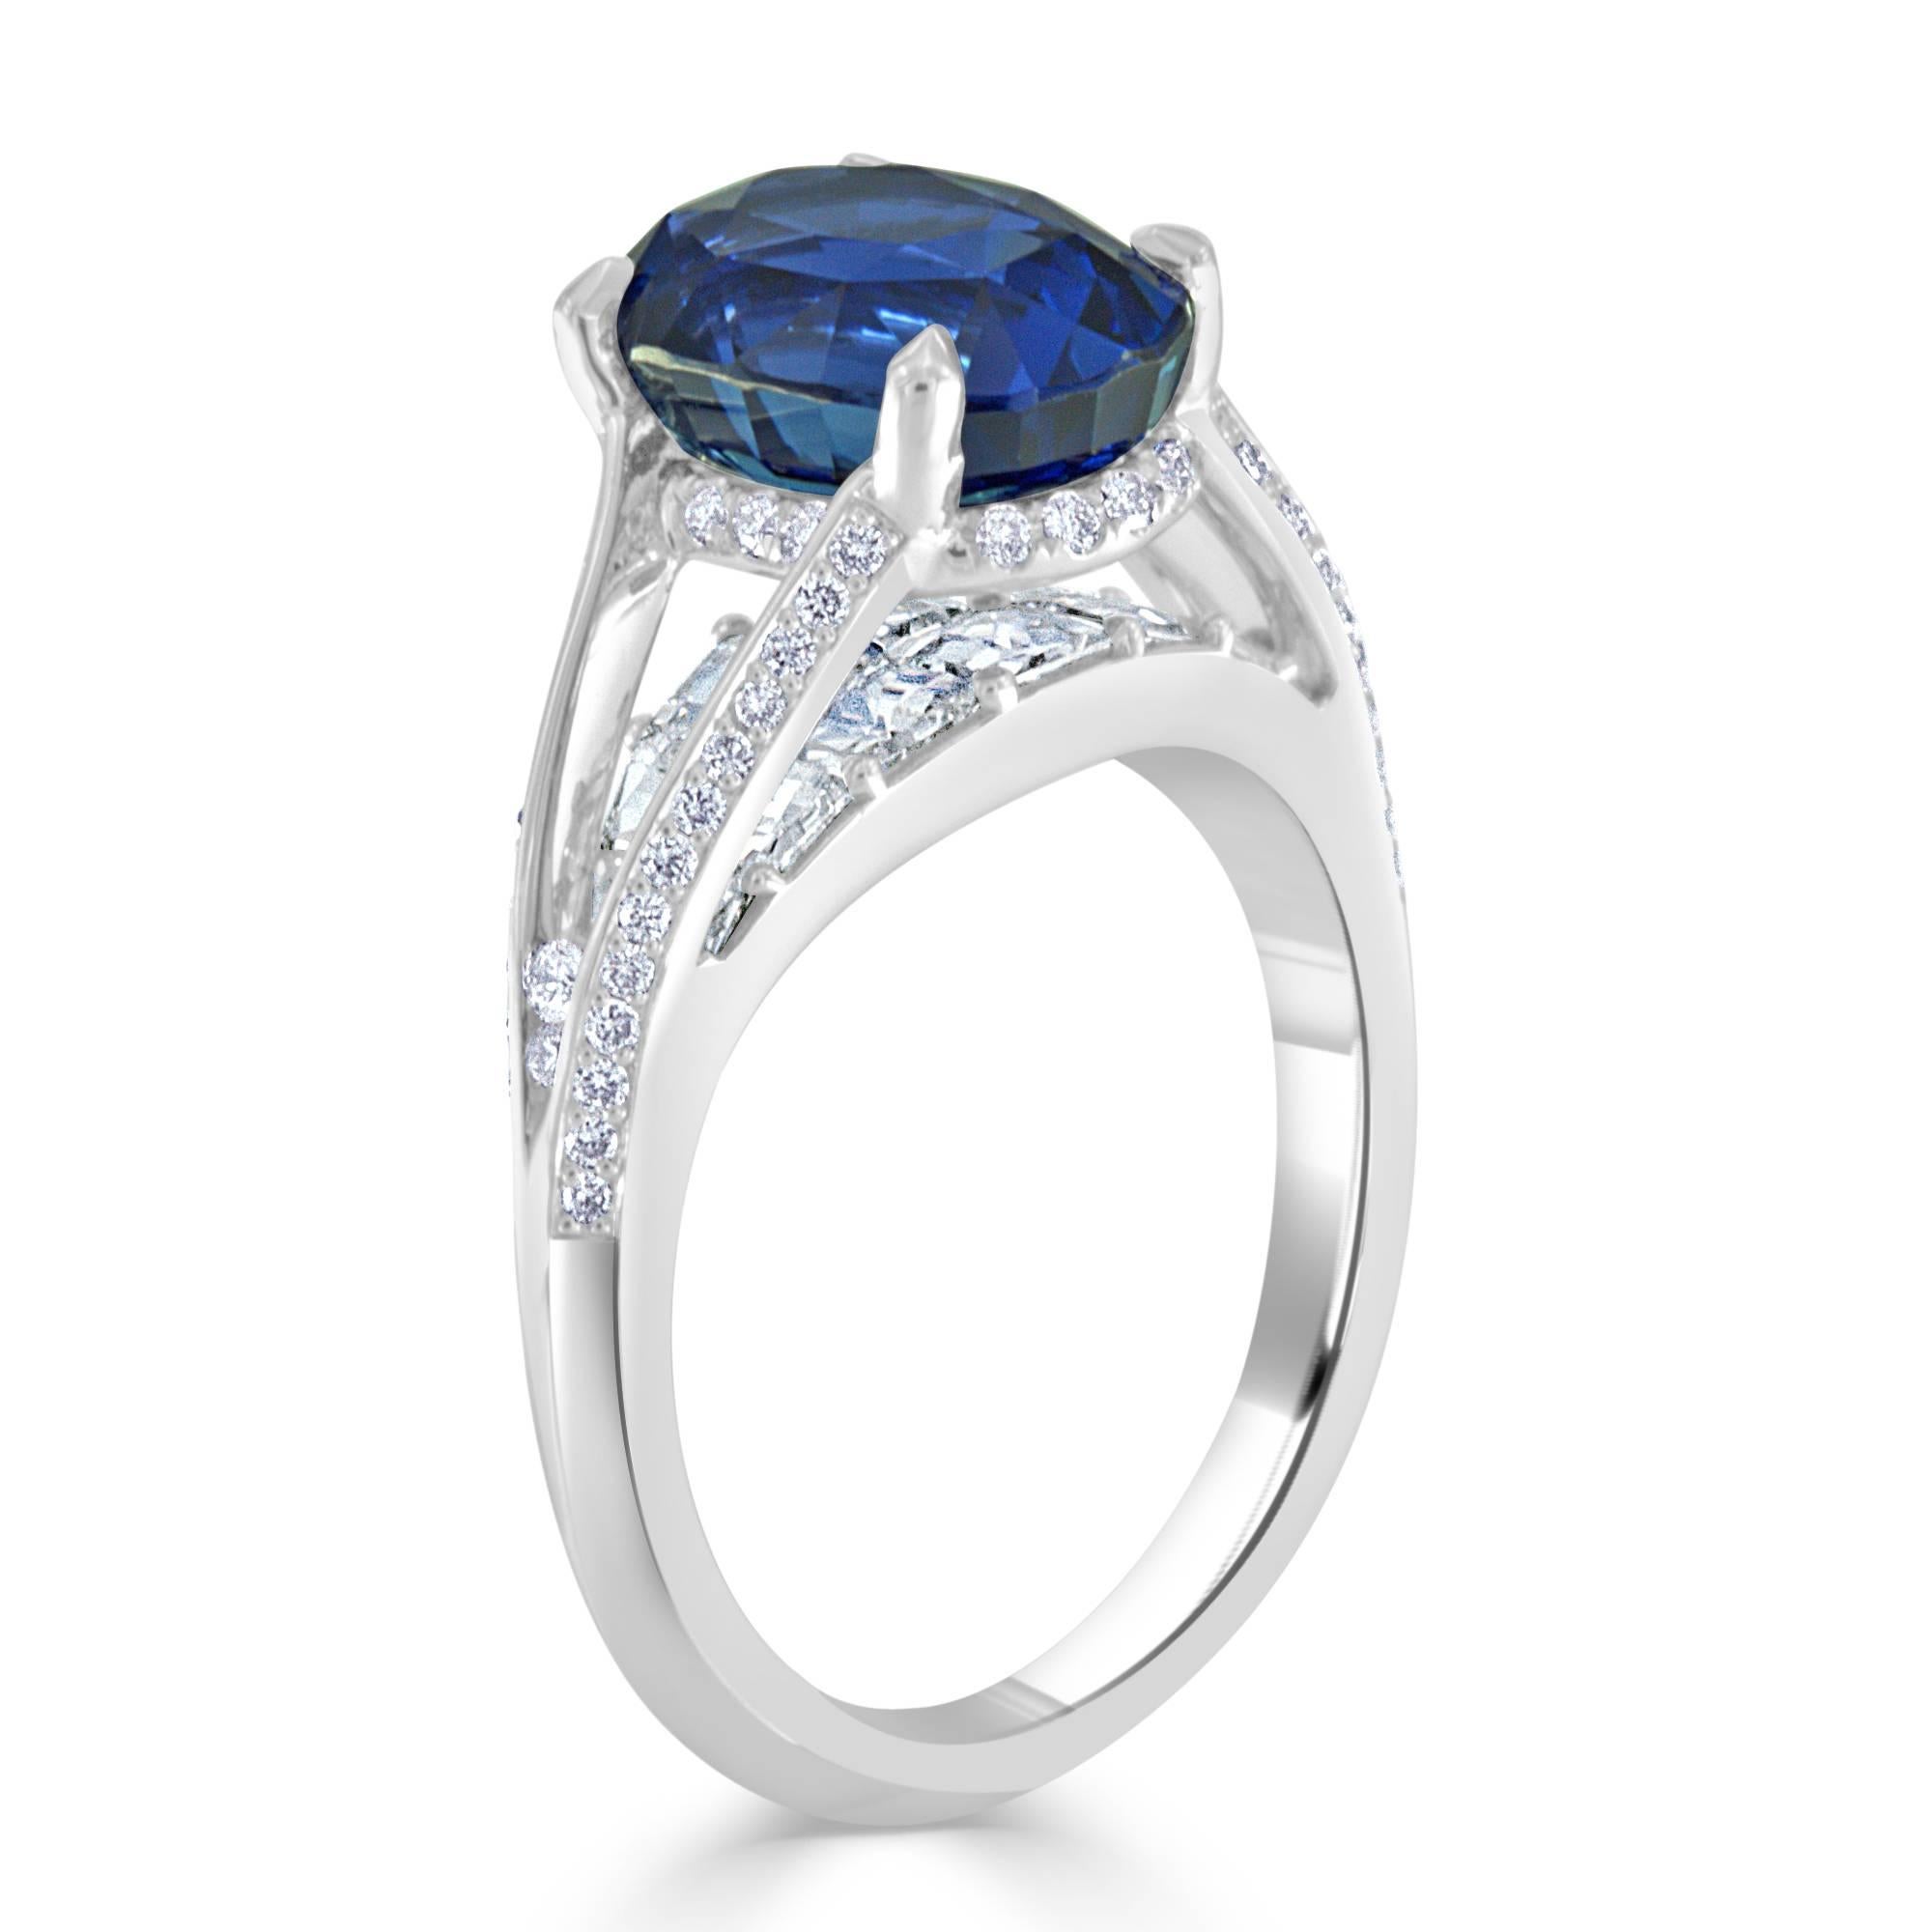 This magnificent sapphire and diamond ring designed by award winning designer and gem cutter Bez Ambar features a 5.16 carat oval cut sapphire having excellent color and cut. The 14- Blaze cut diamonds weighing 1.35 carats total are set beneath the